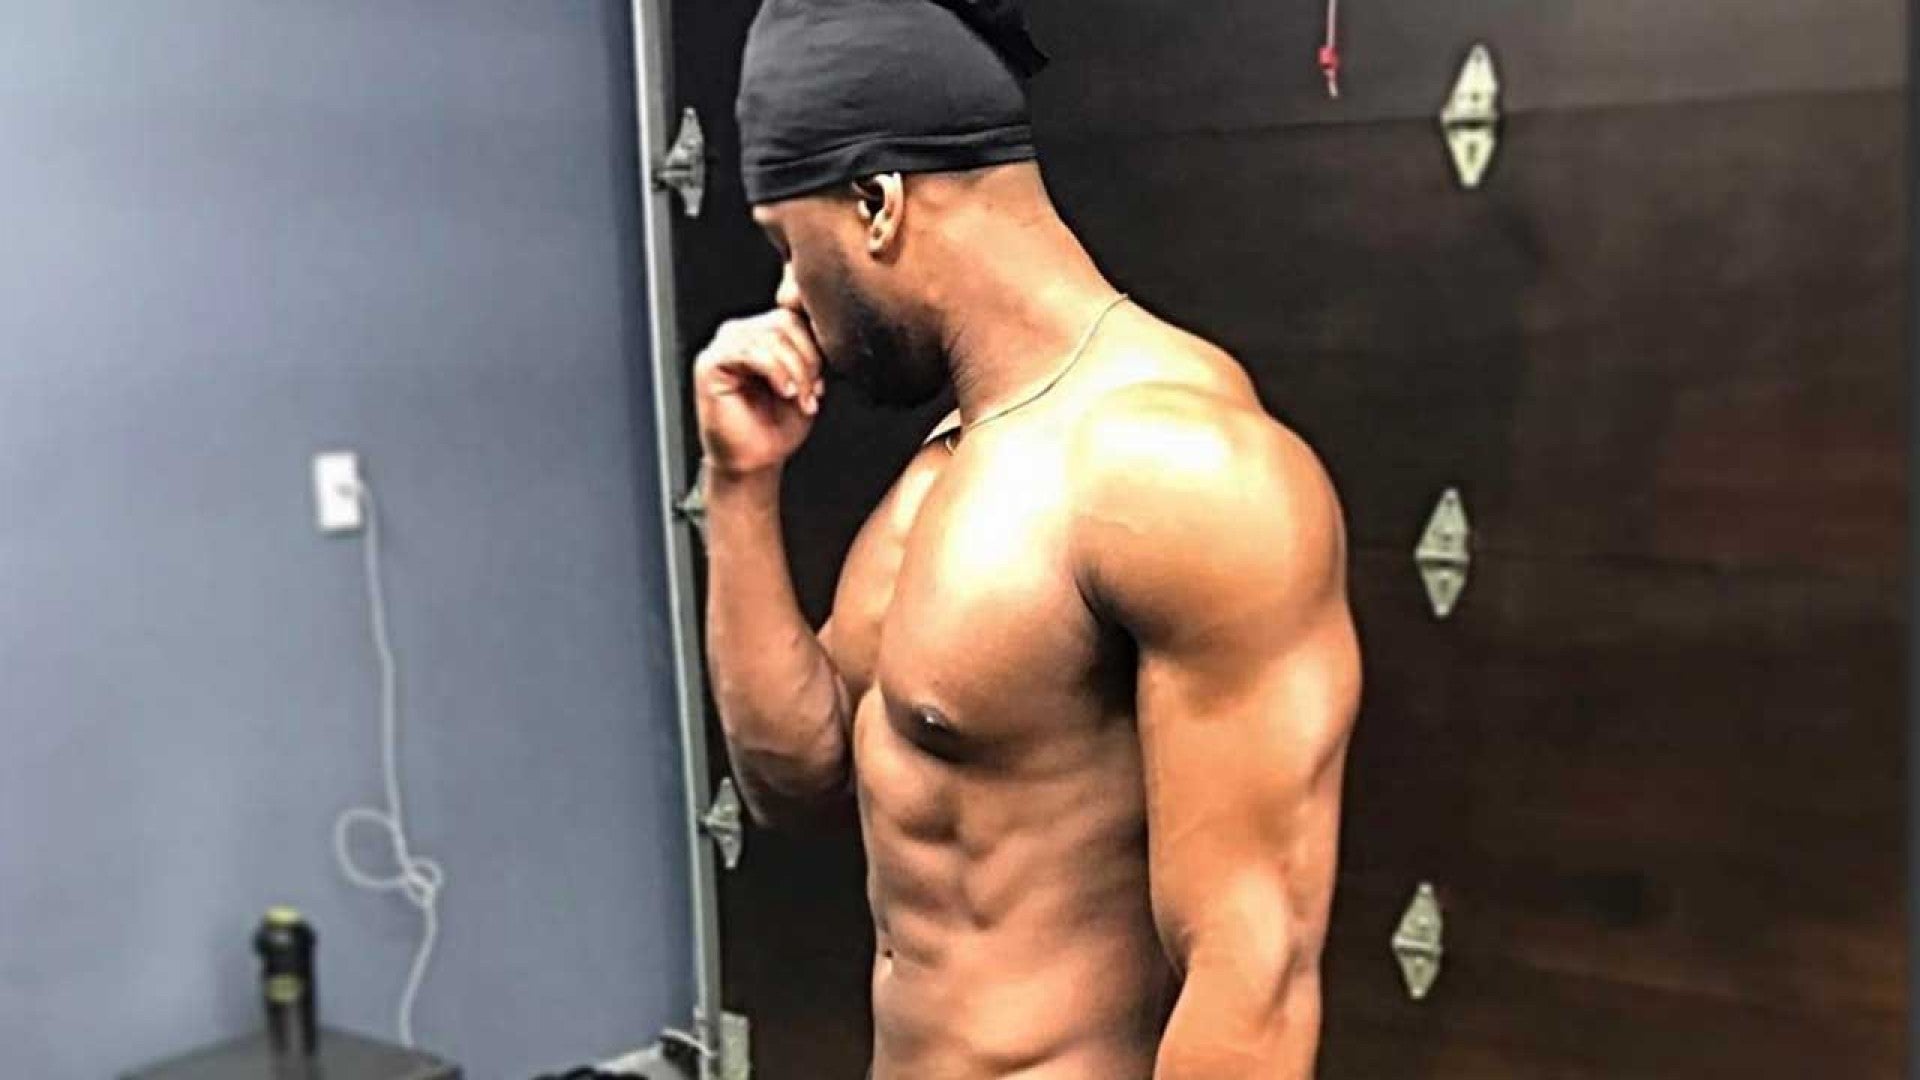 Panther' Star Michael B. Jordan Shows Off His Ripped Body in ...